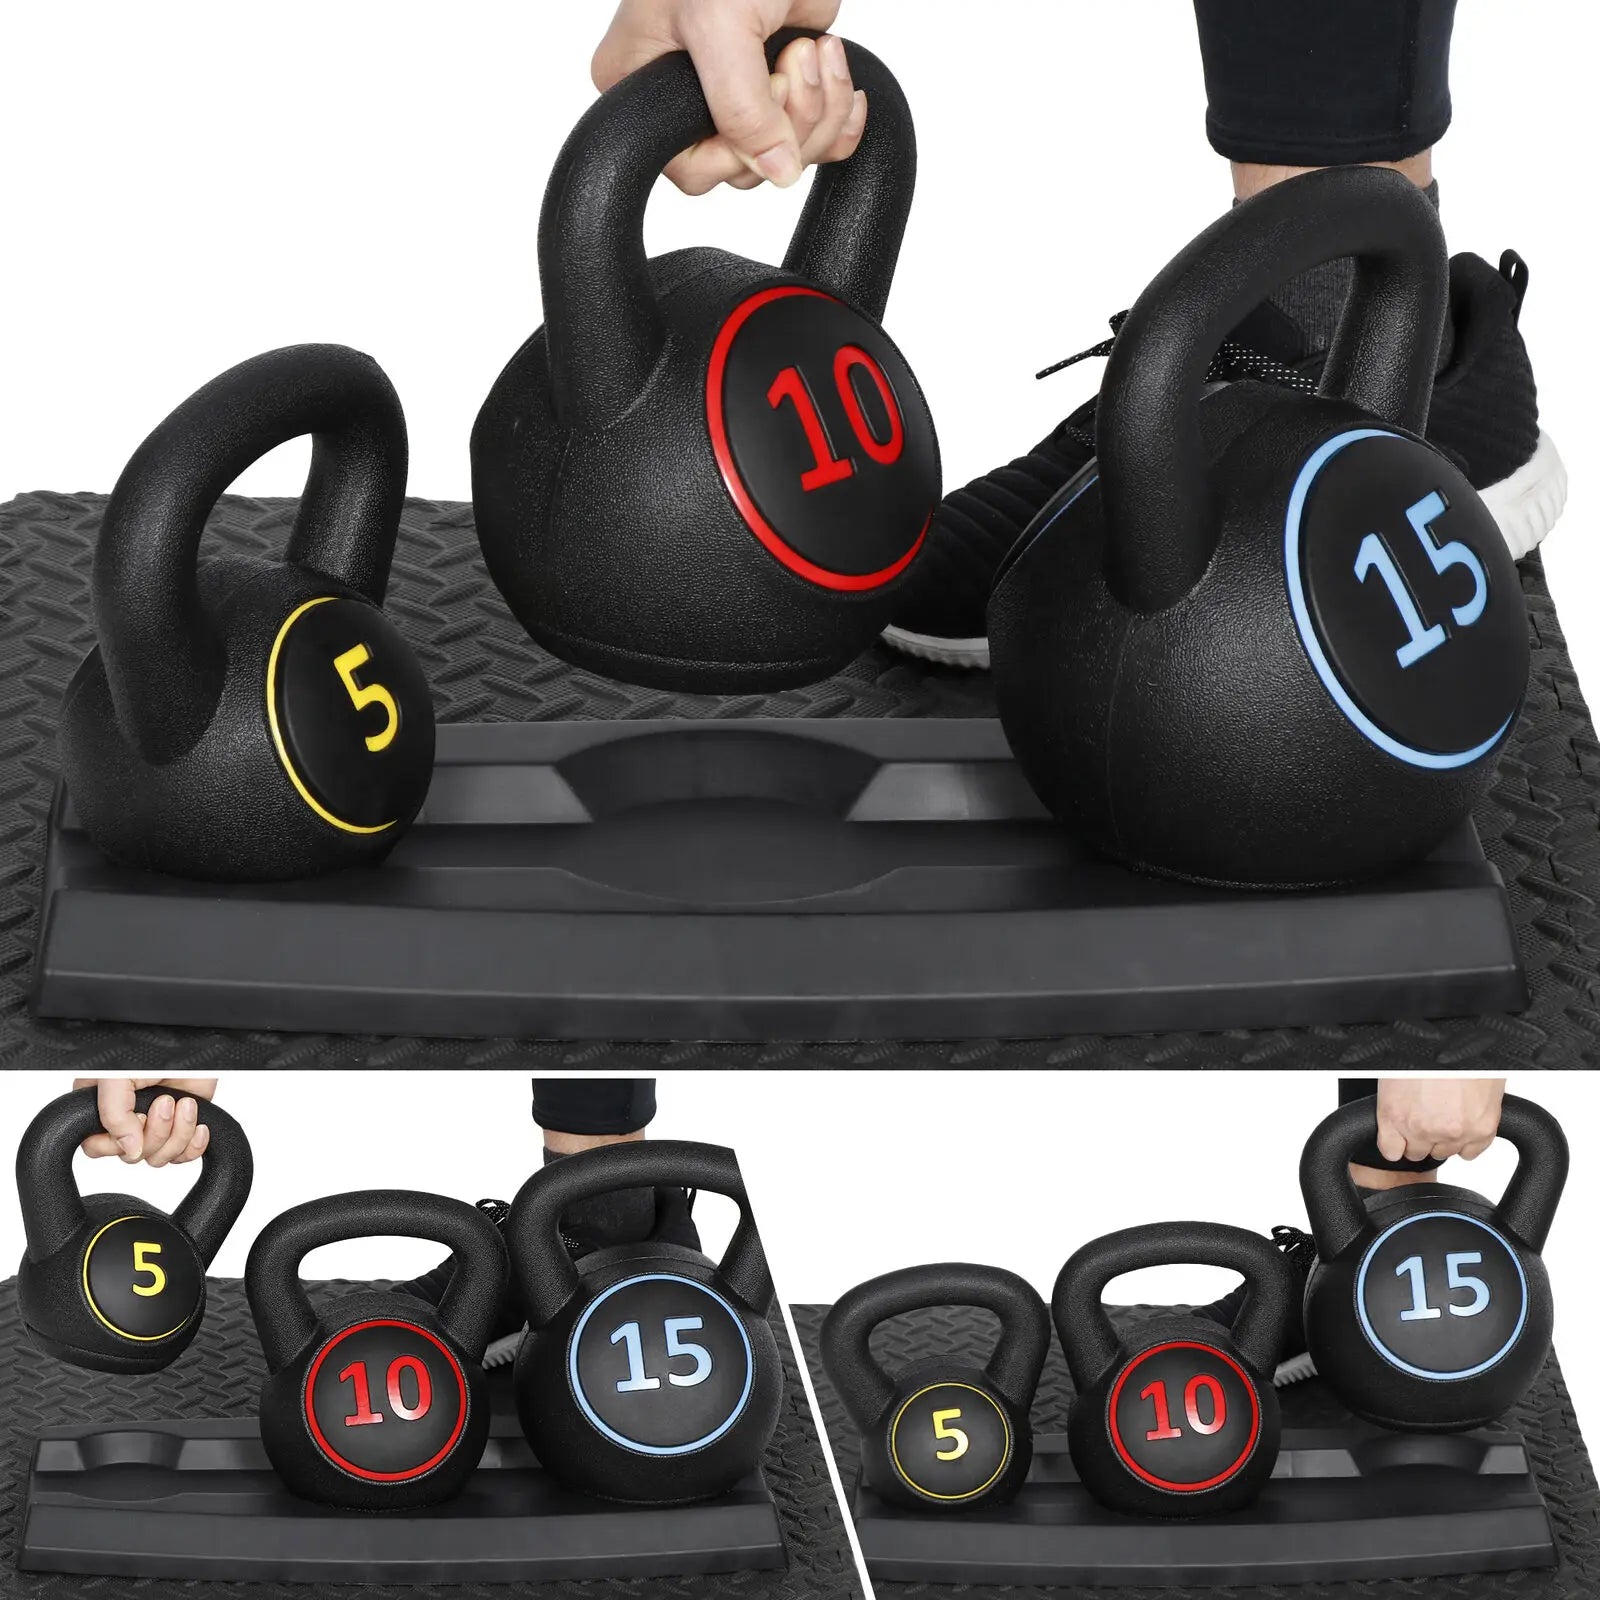 3-Piece Kettlebell Set Fitness Strength Training Exercise with Base Home Gym